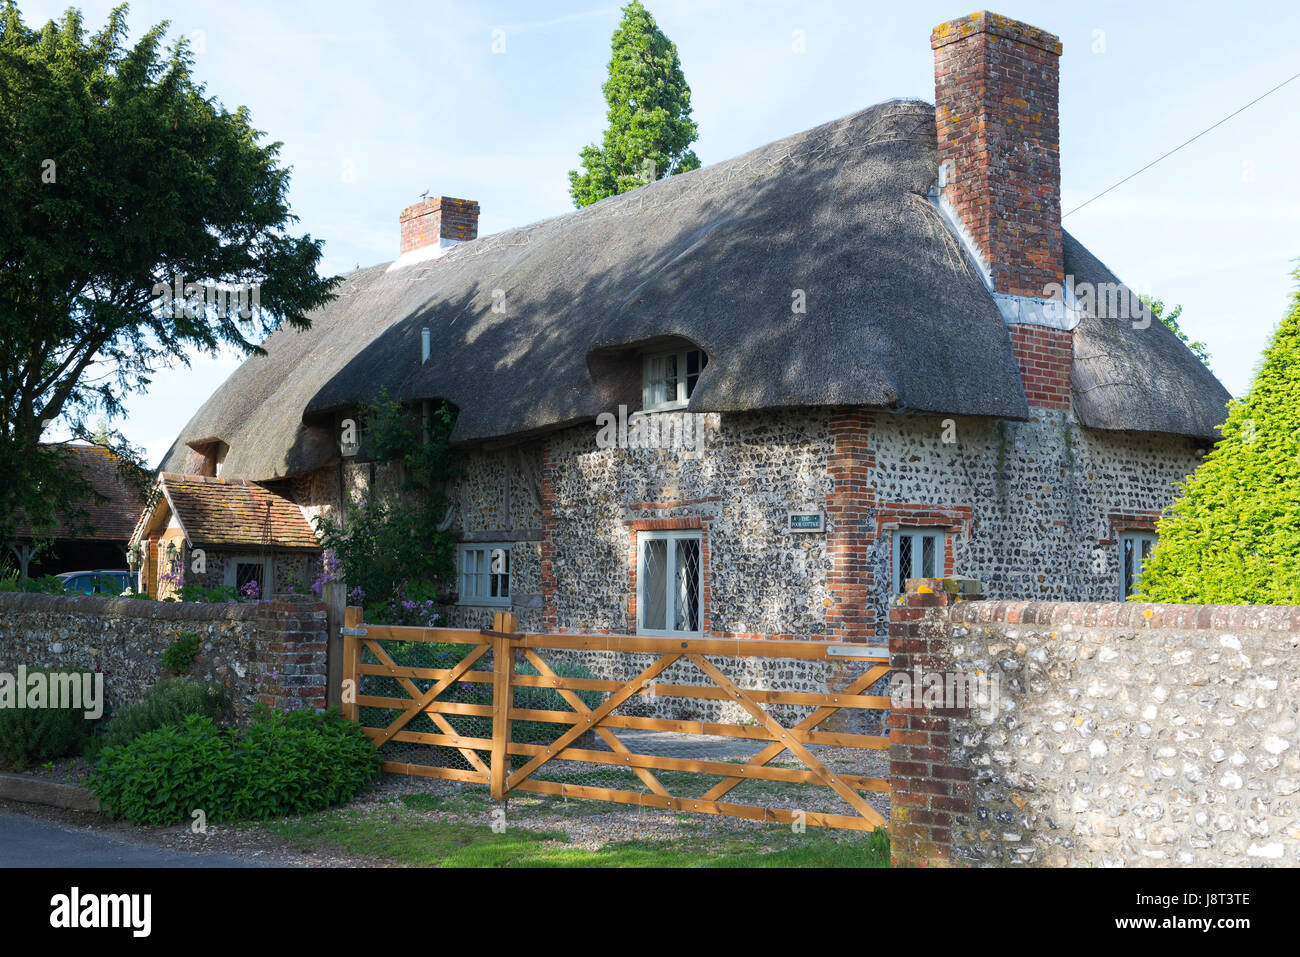 Traditional thatched flint and brick cottage in the coastal village of Chidham, West Sussex, UK Stock Photo